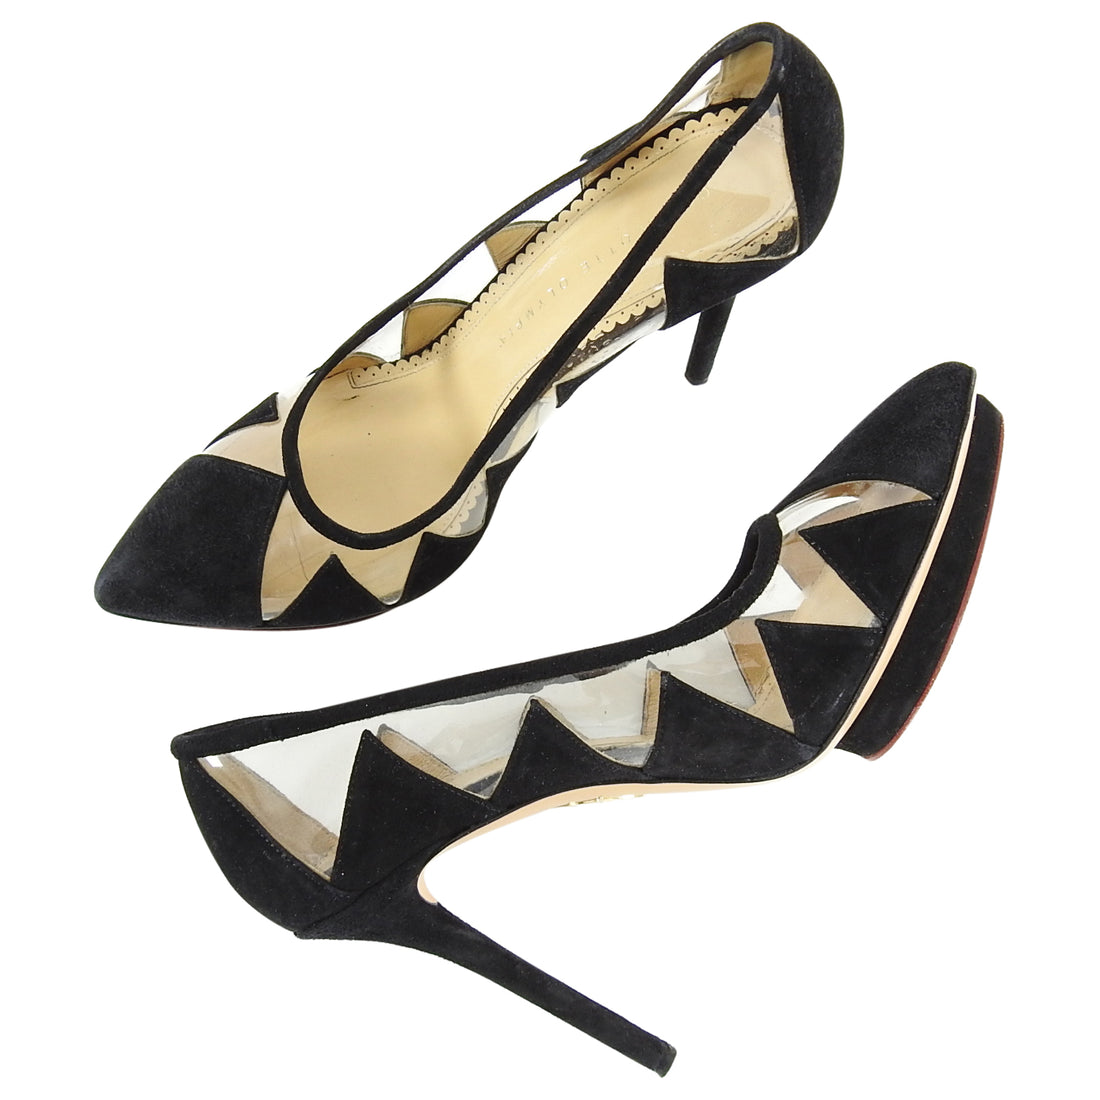 Charlotte Olympia Ana Maria Black Suede and Vinyl Pumps - 38.5